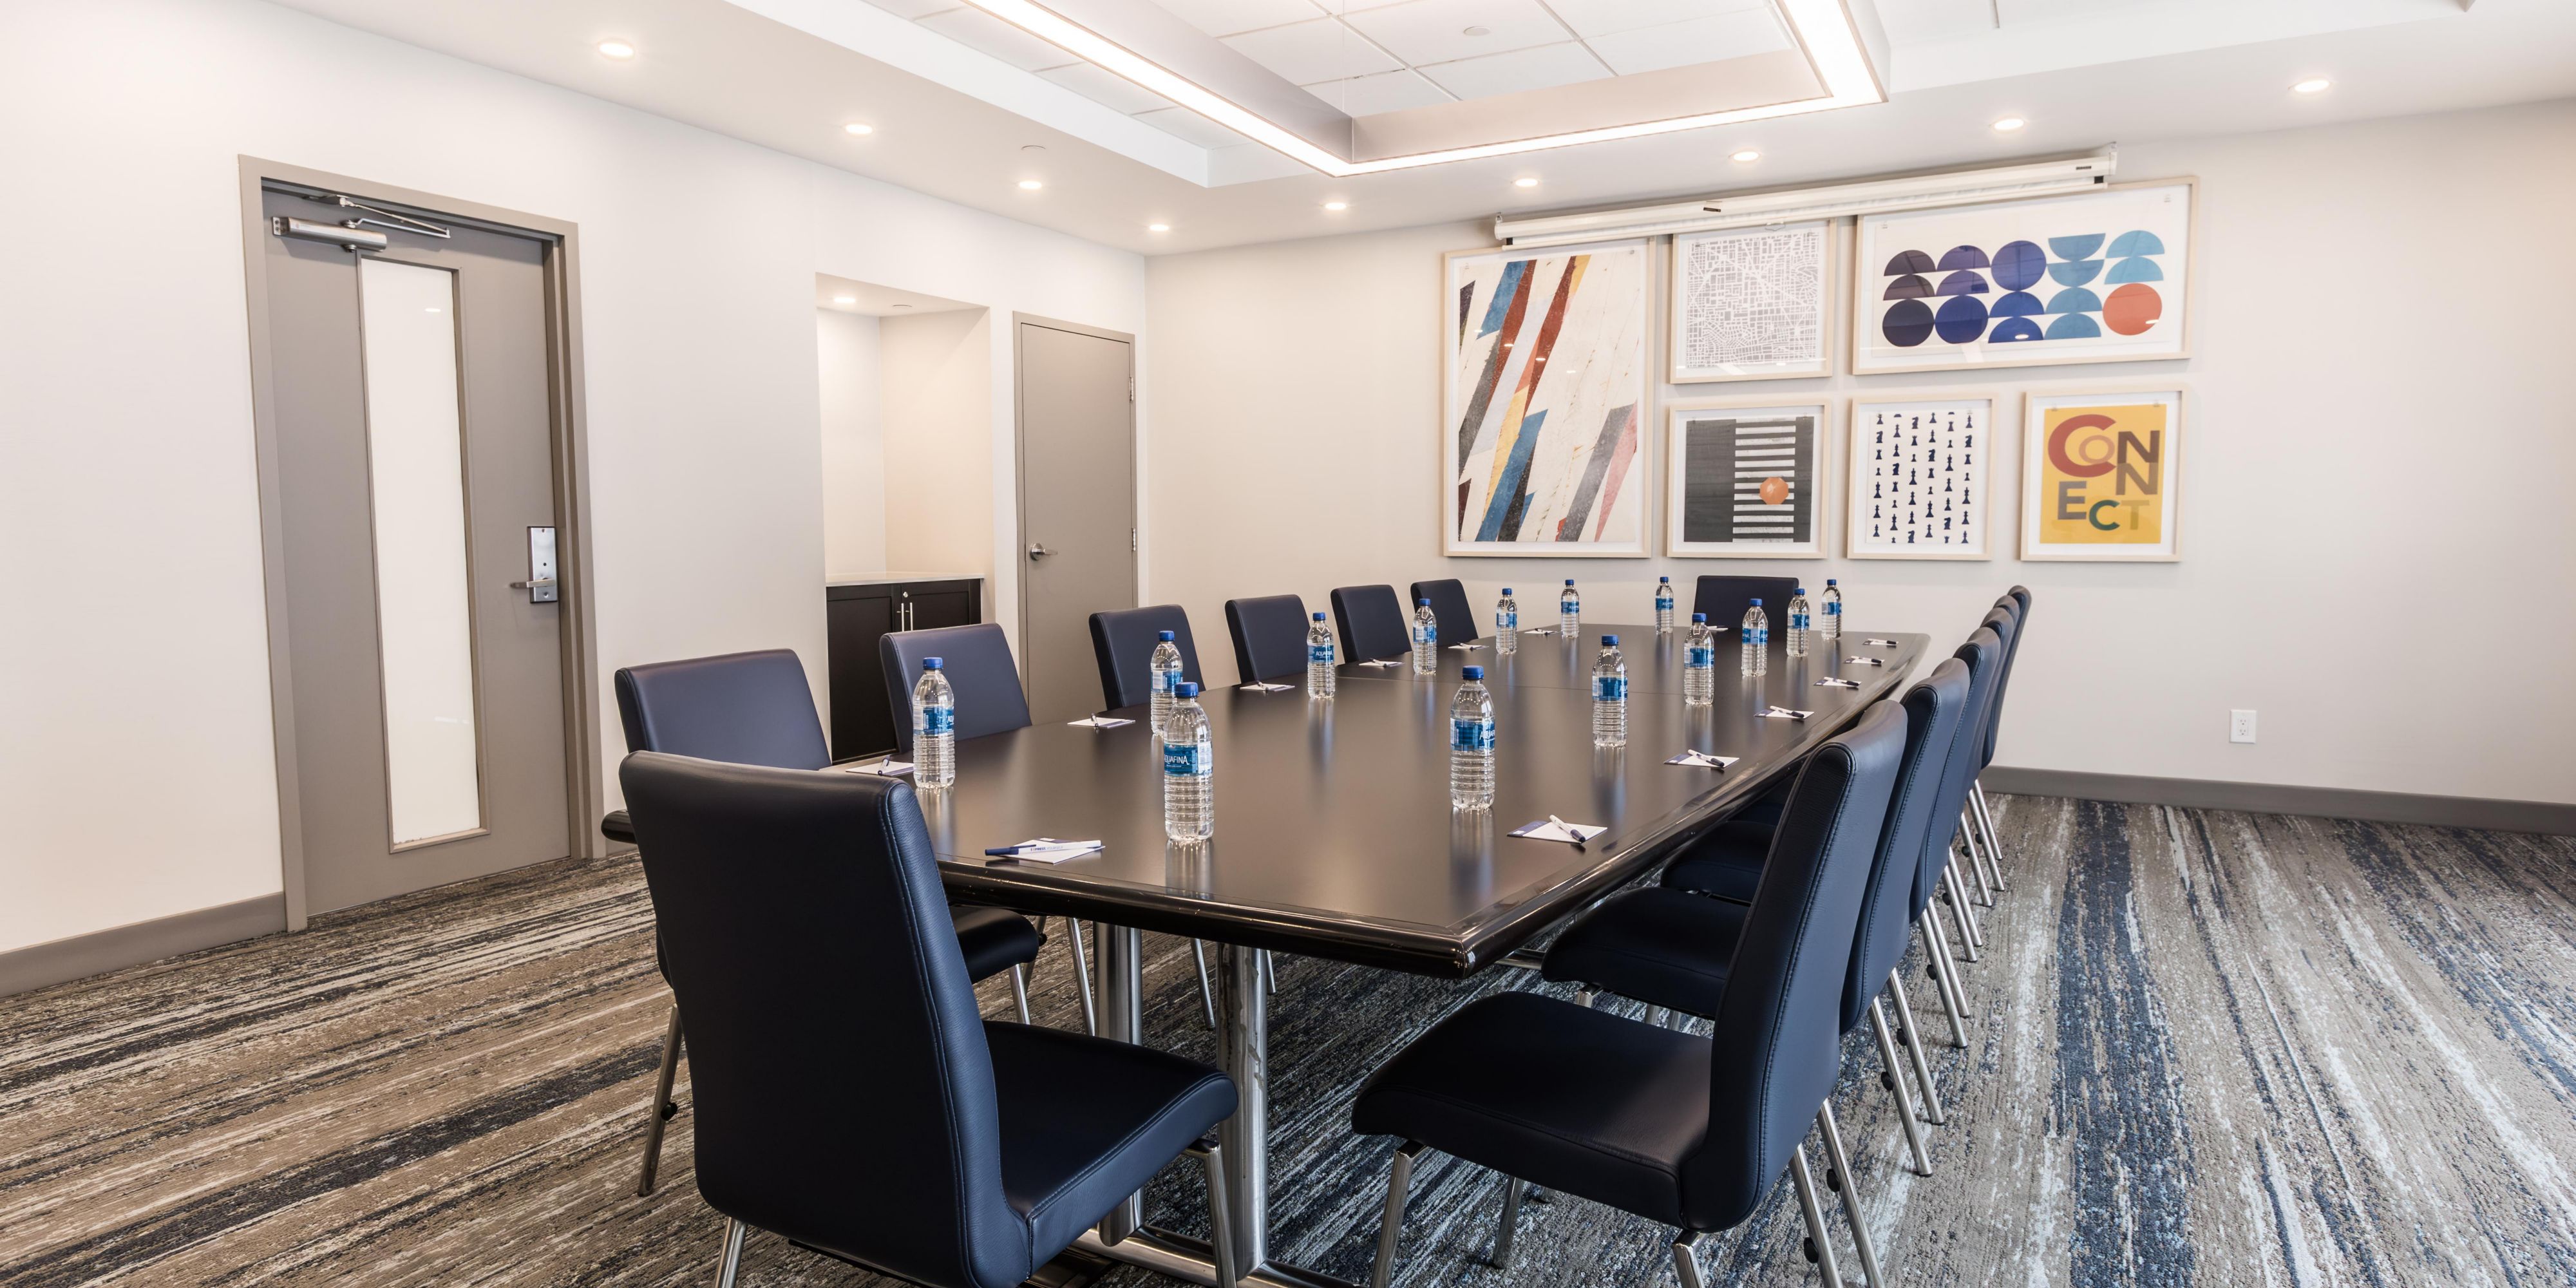 Experience our versatile 1,000 square feet of space for your next event.  Perfect for small to medium-sized groups, we will work with you to set up all the essentials you need for your meeting including catering and A/V equipment.